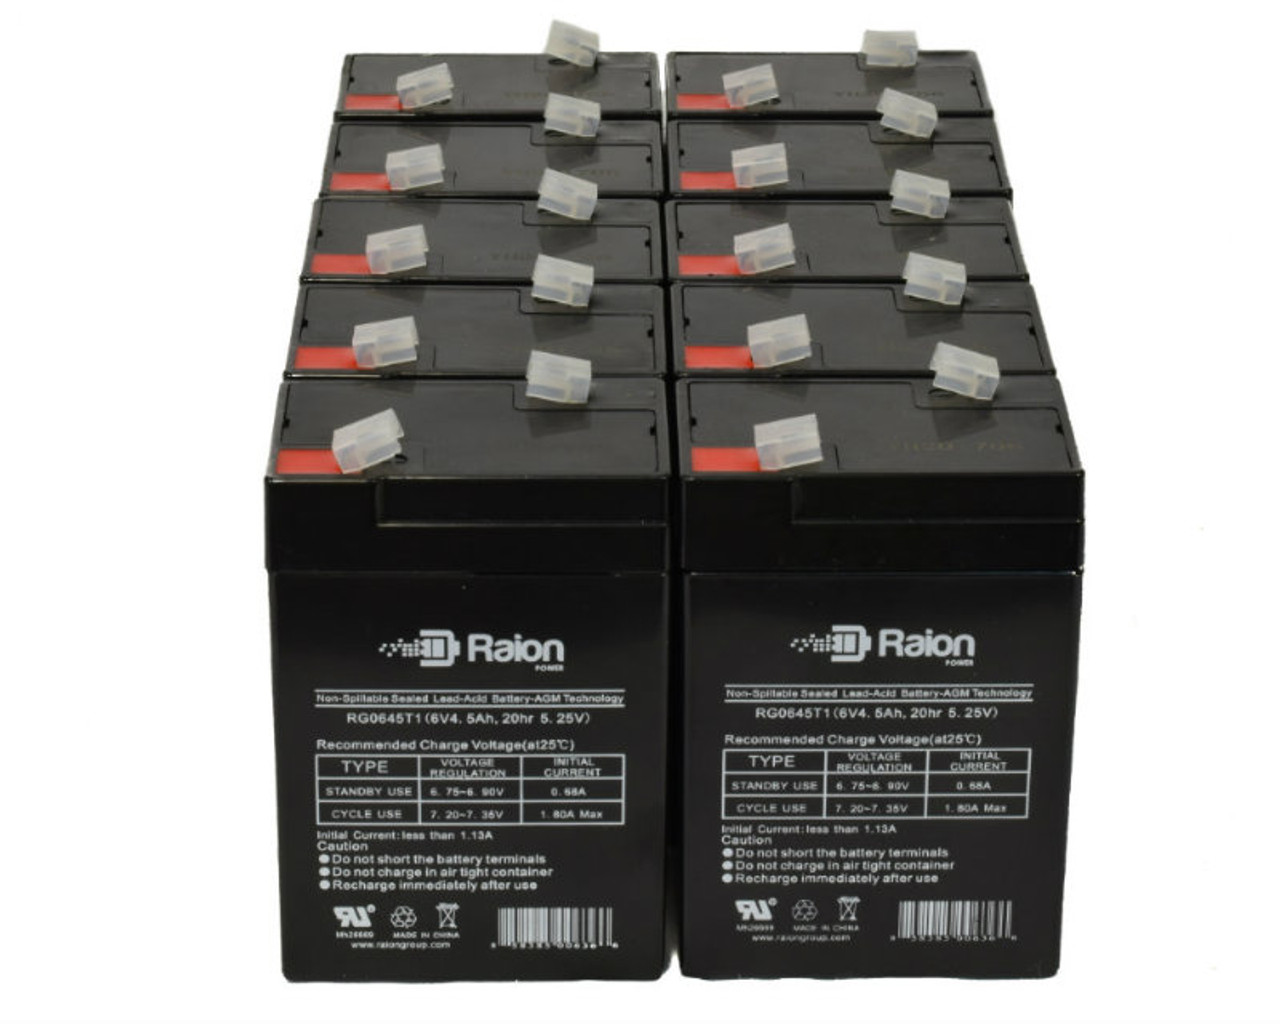 Raion Power 6V 4.5Ah Replacement Emergency Light Battery for Lithonia FAP - 10 Pack